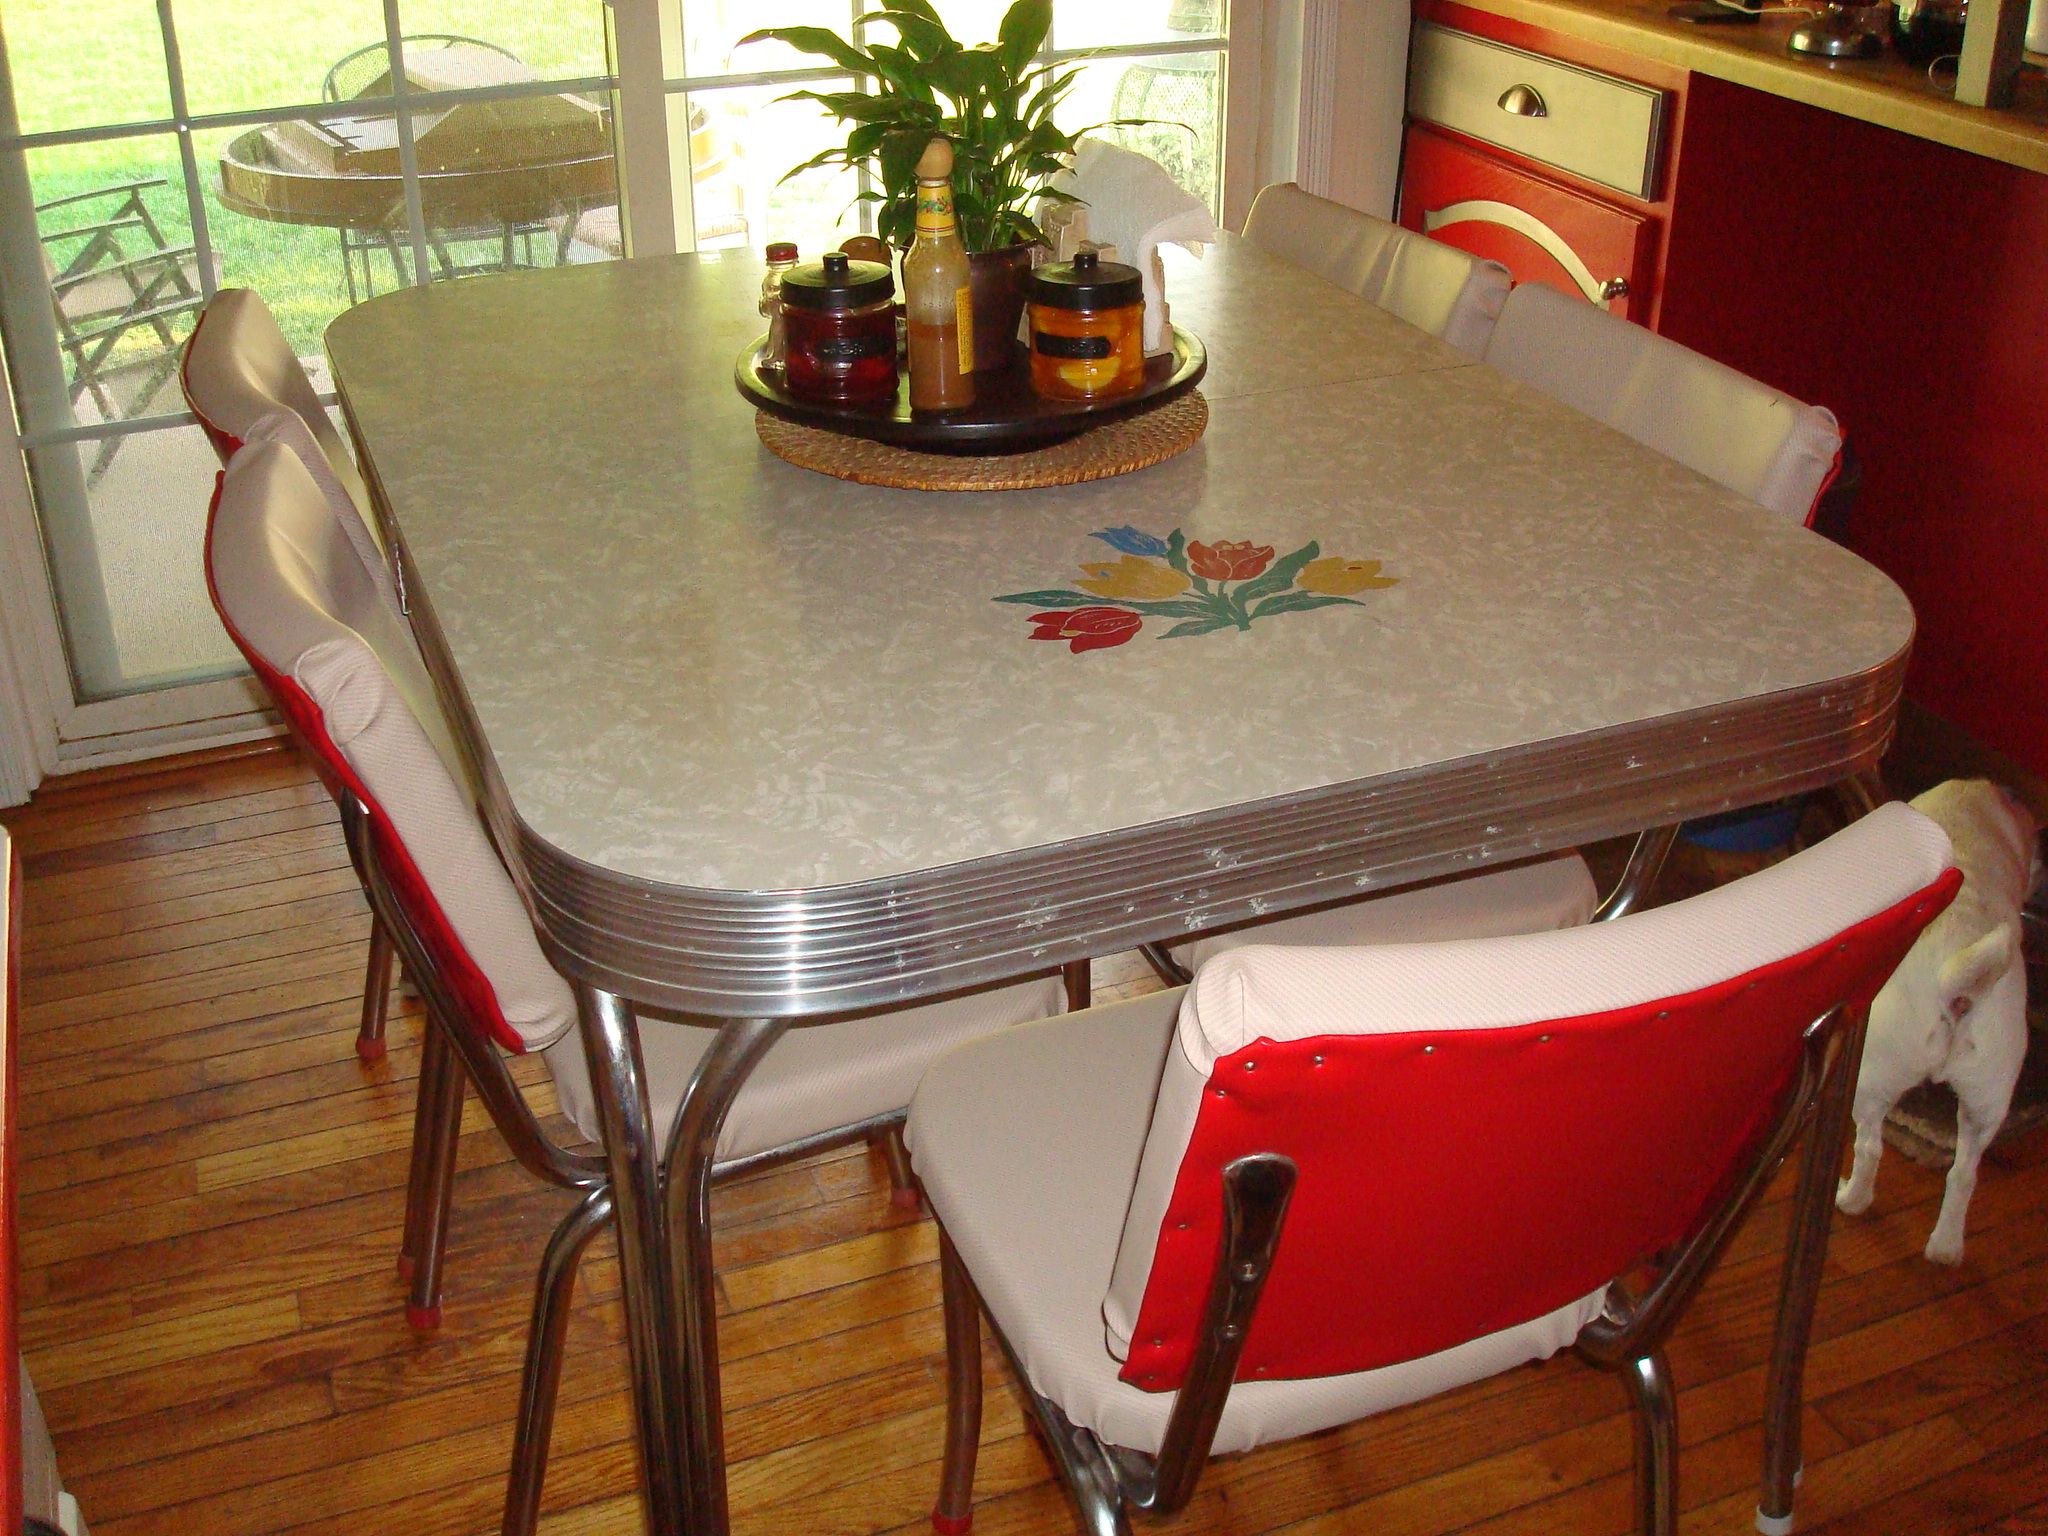 1950 green kitchen table and chair